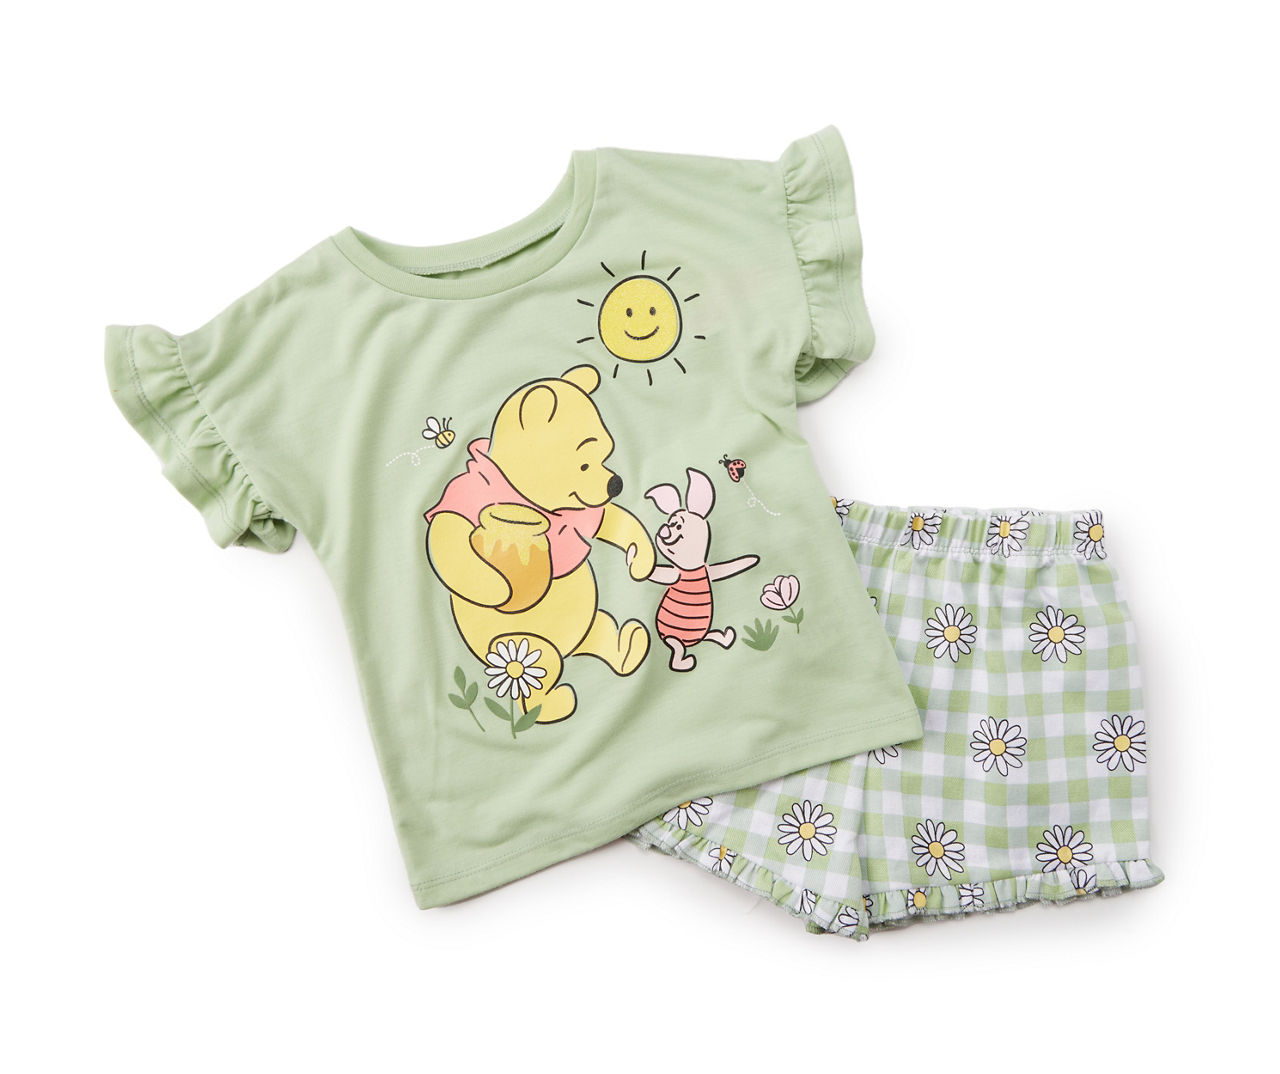 Toddler Size 4T Green Winnie-the-Pooh Daisy Tee & Shorts